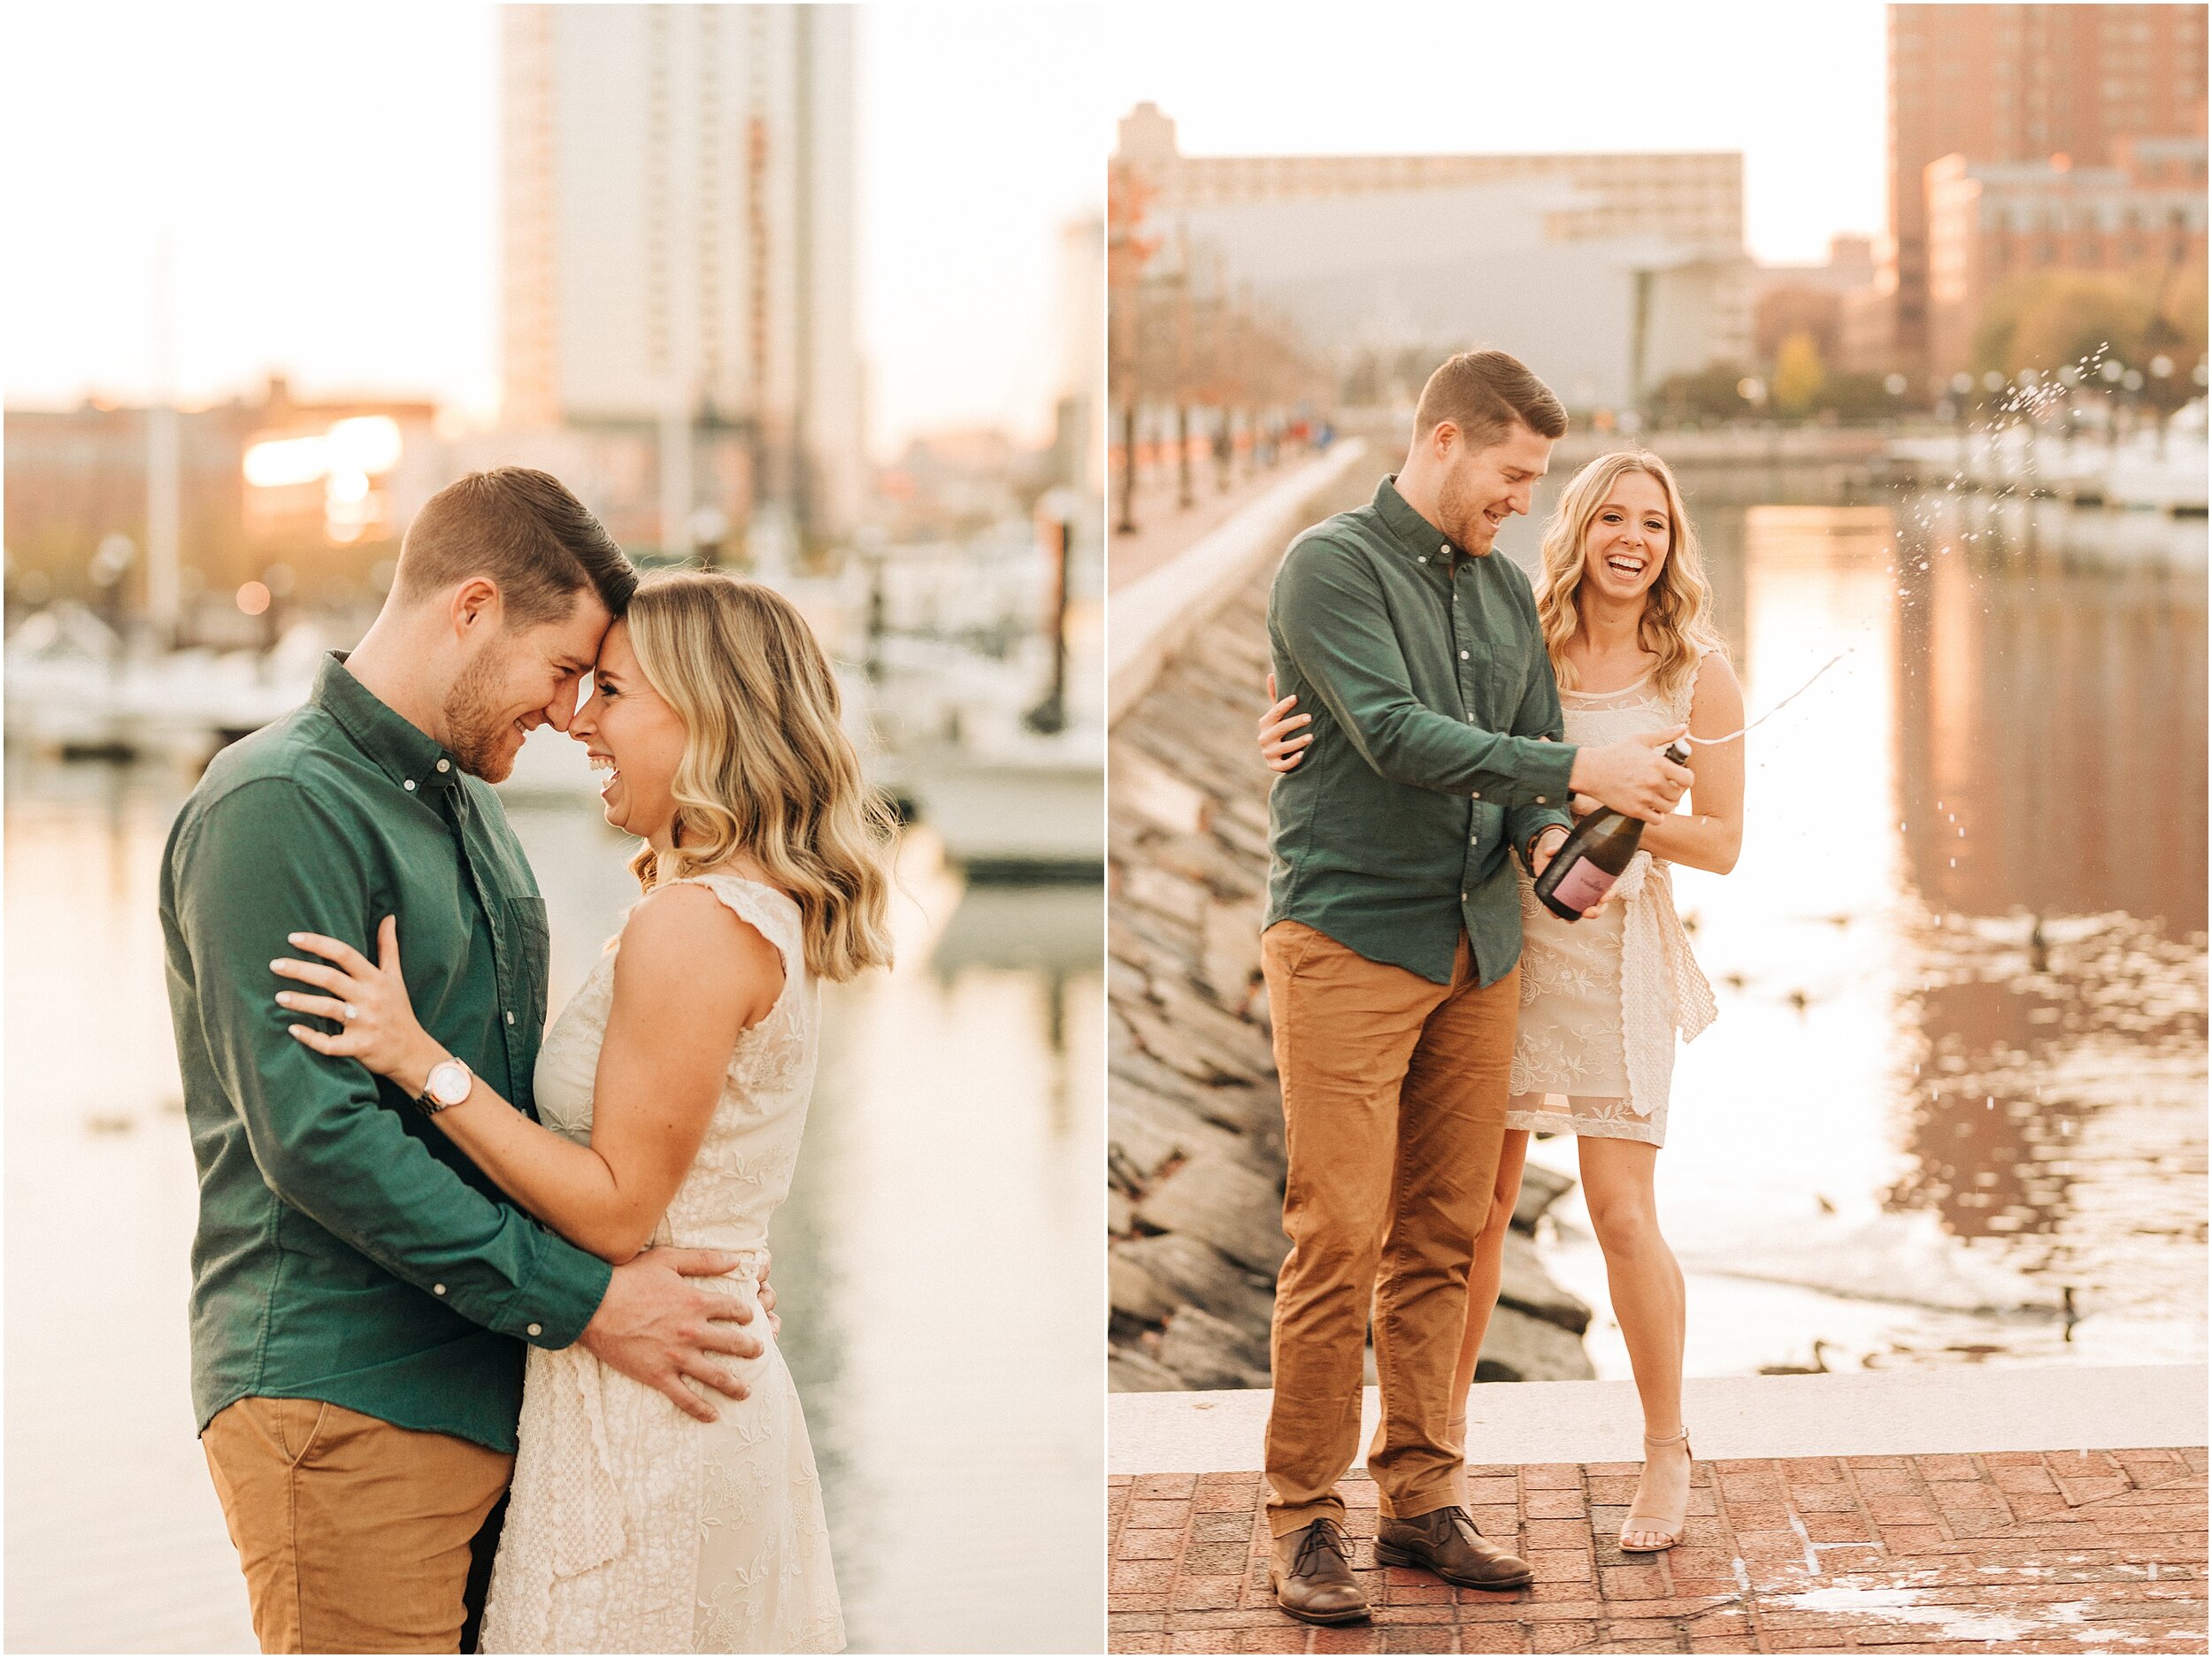 hannah leigh photography Baltimore City Maryland October Engagement Session_7067.jpg